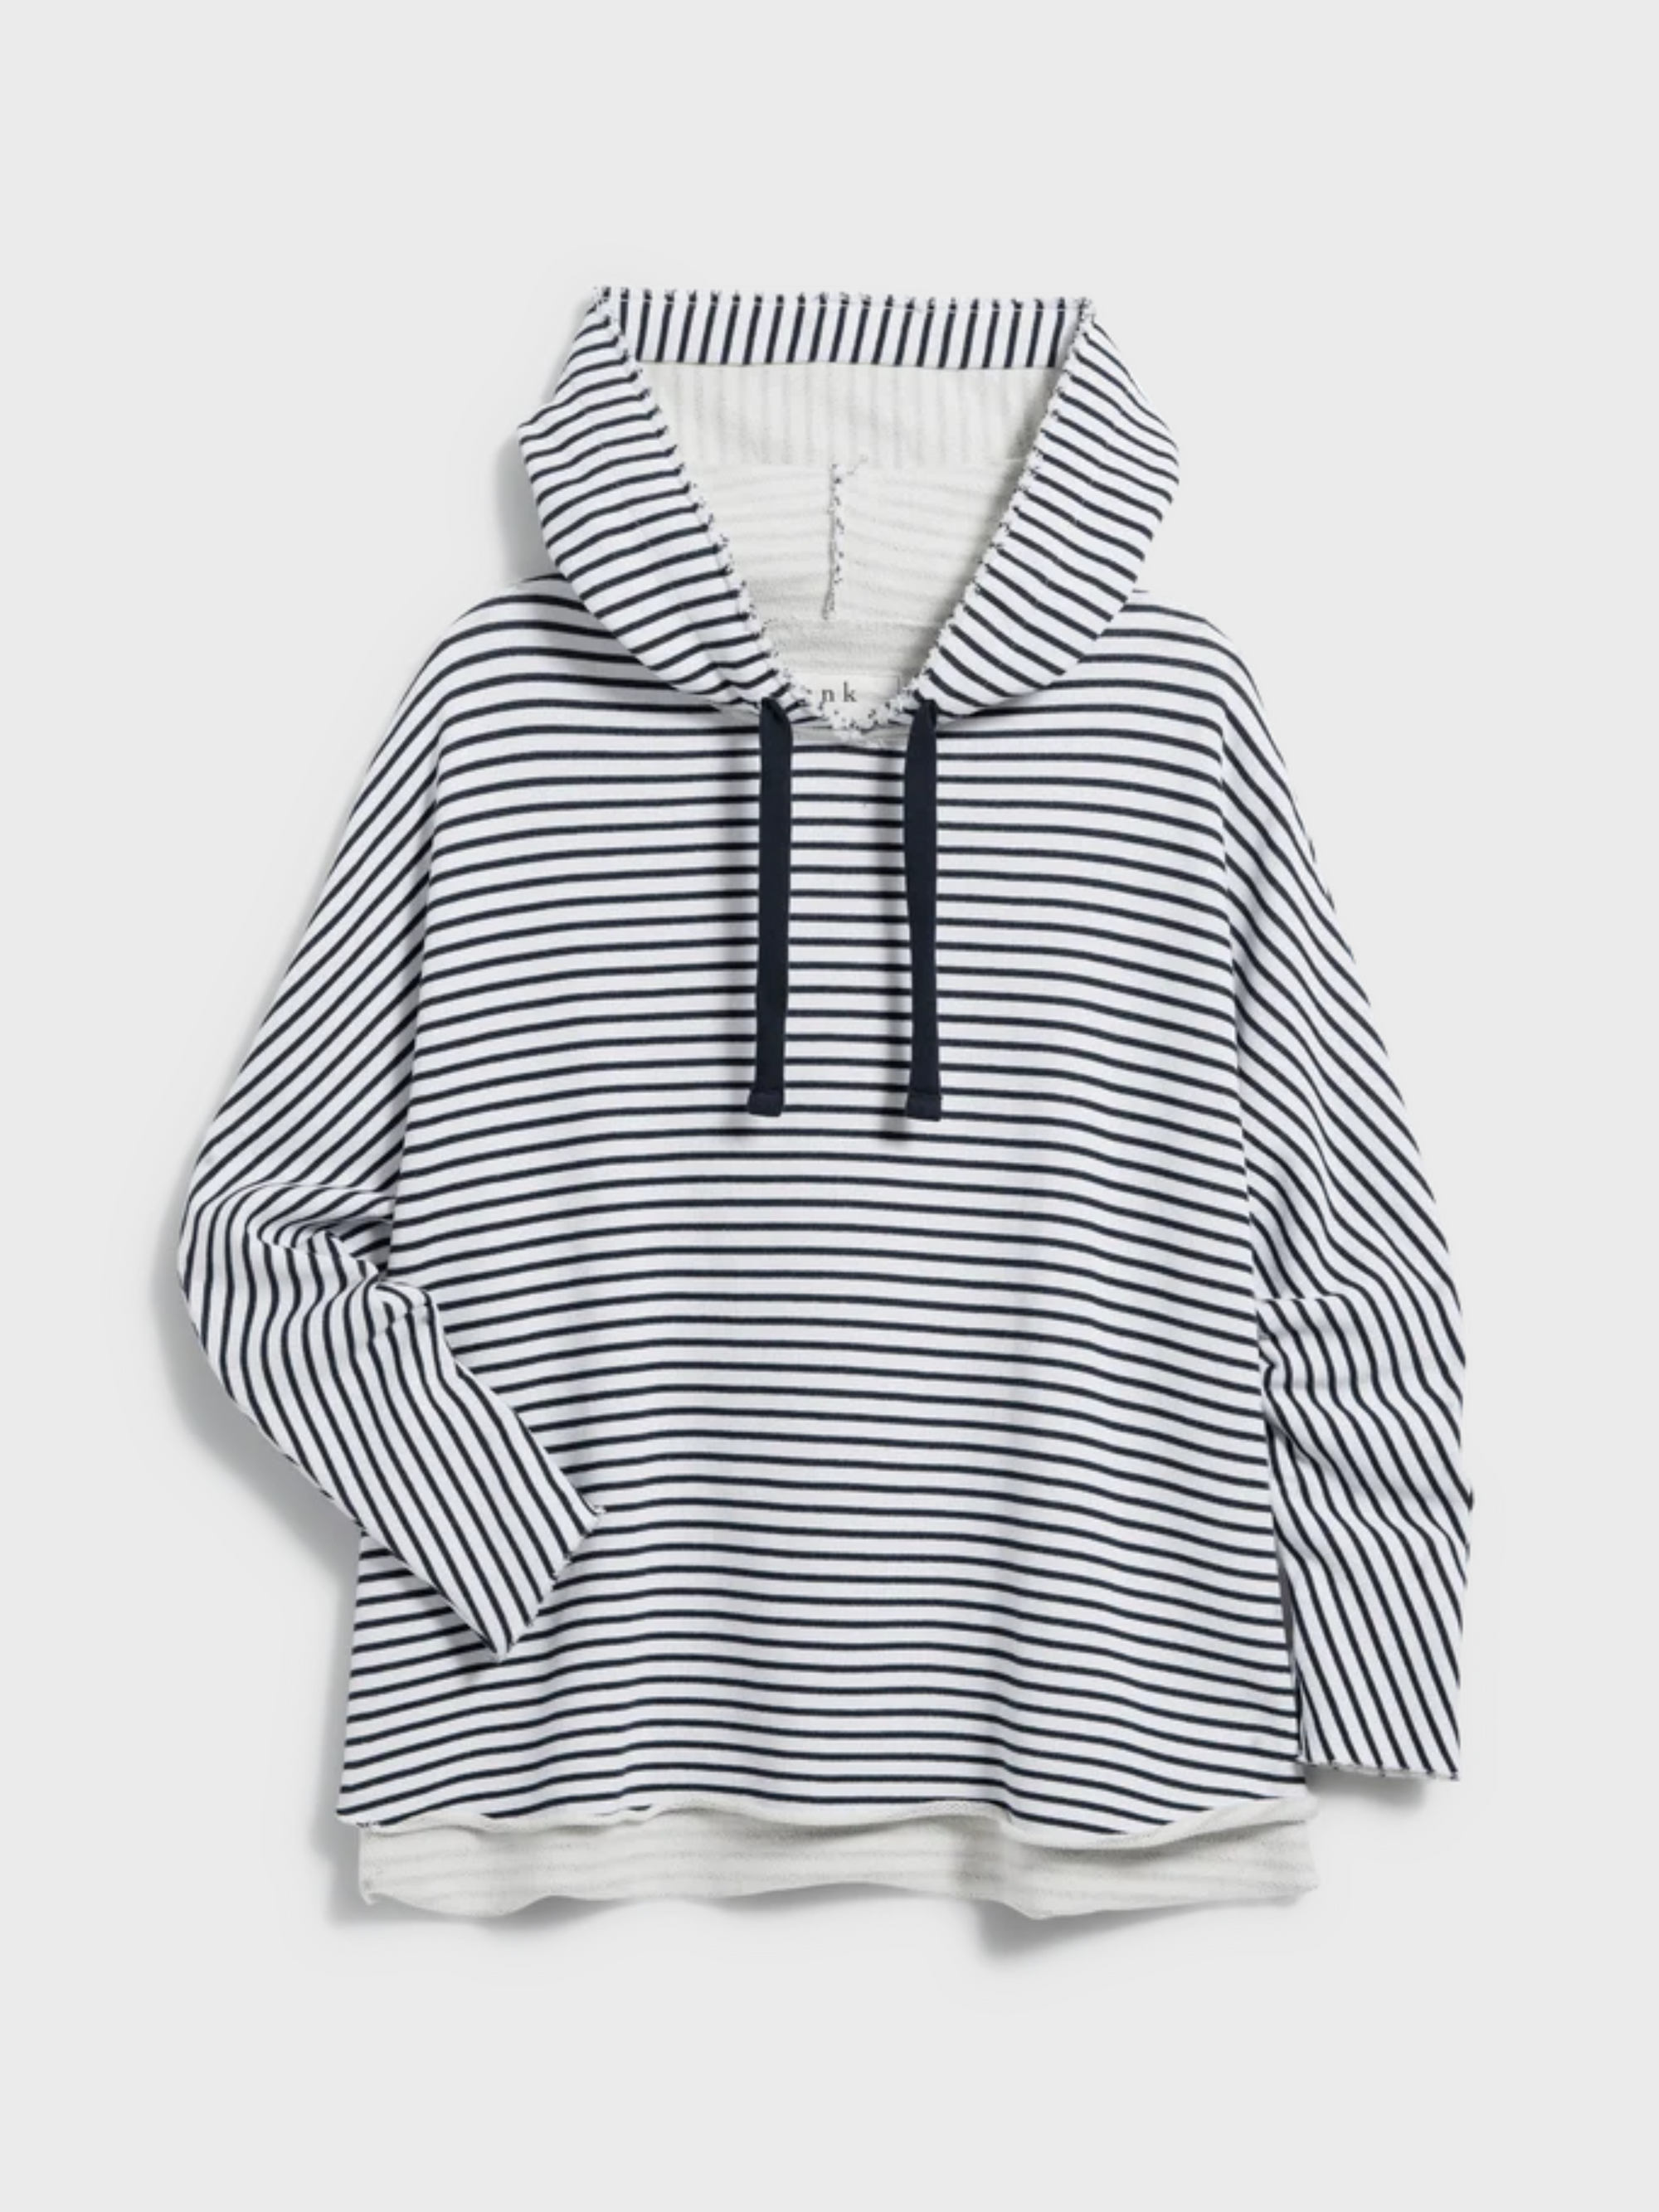 Frank & Eileen Kane Capelet Hoodie White Navy Stripe-Sweatshirts-West of Woodward Boutique-Vancouver-Canada